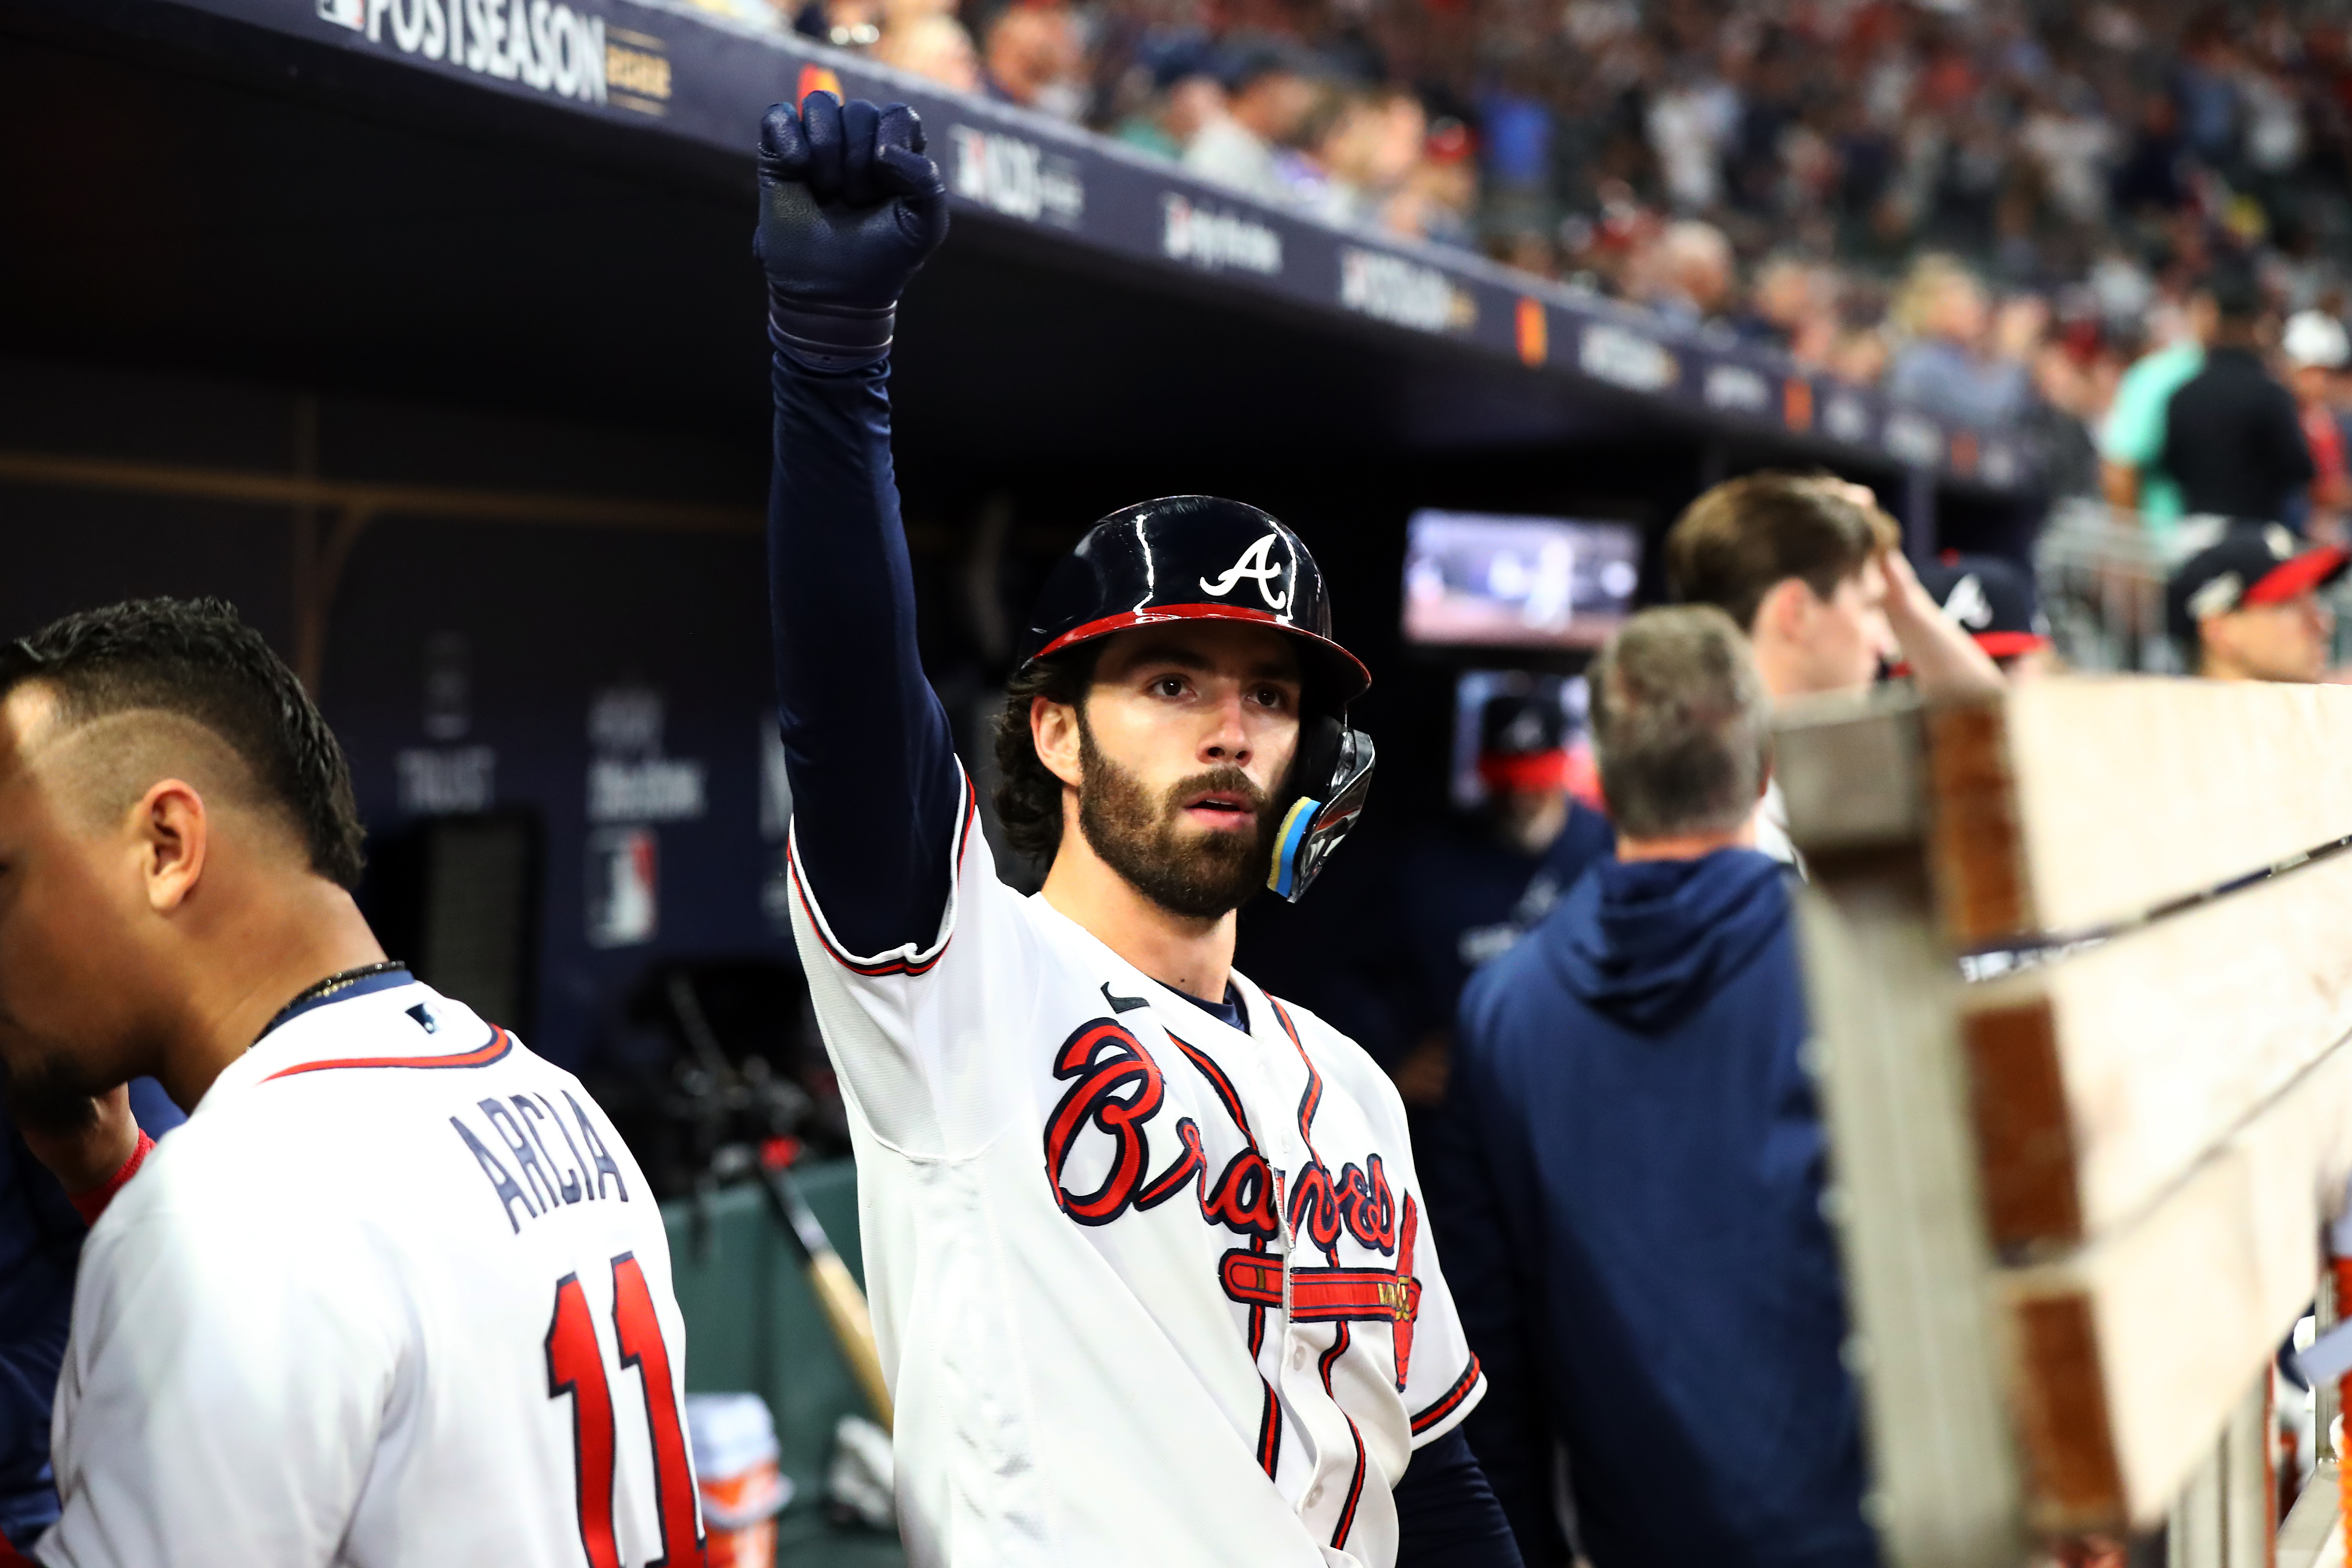 The real reason Dansby Swanson is still left unsigned in free agency